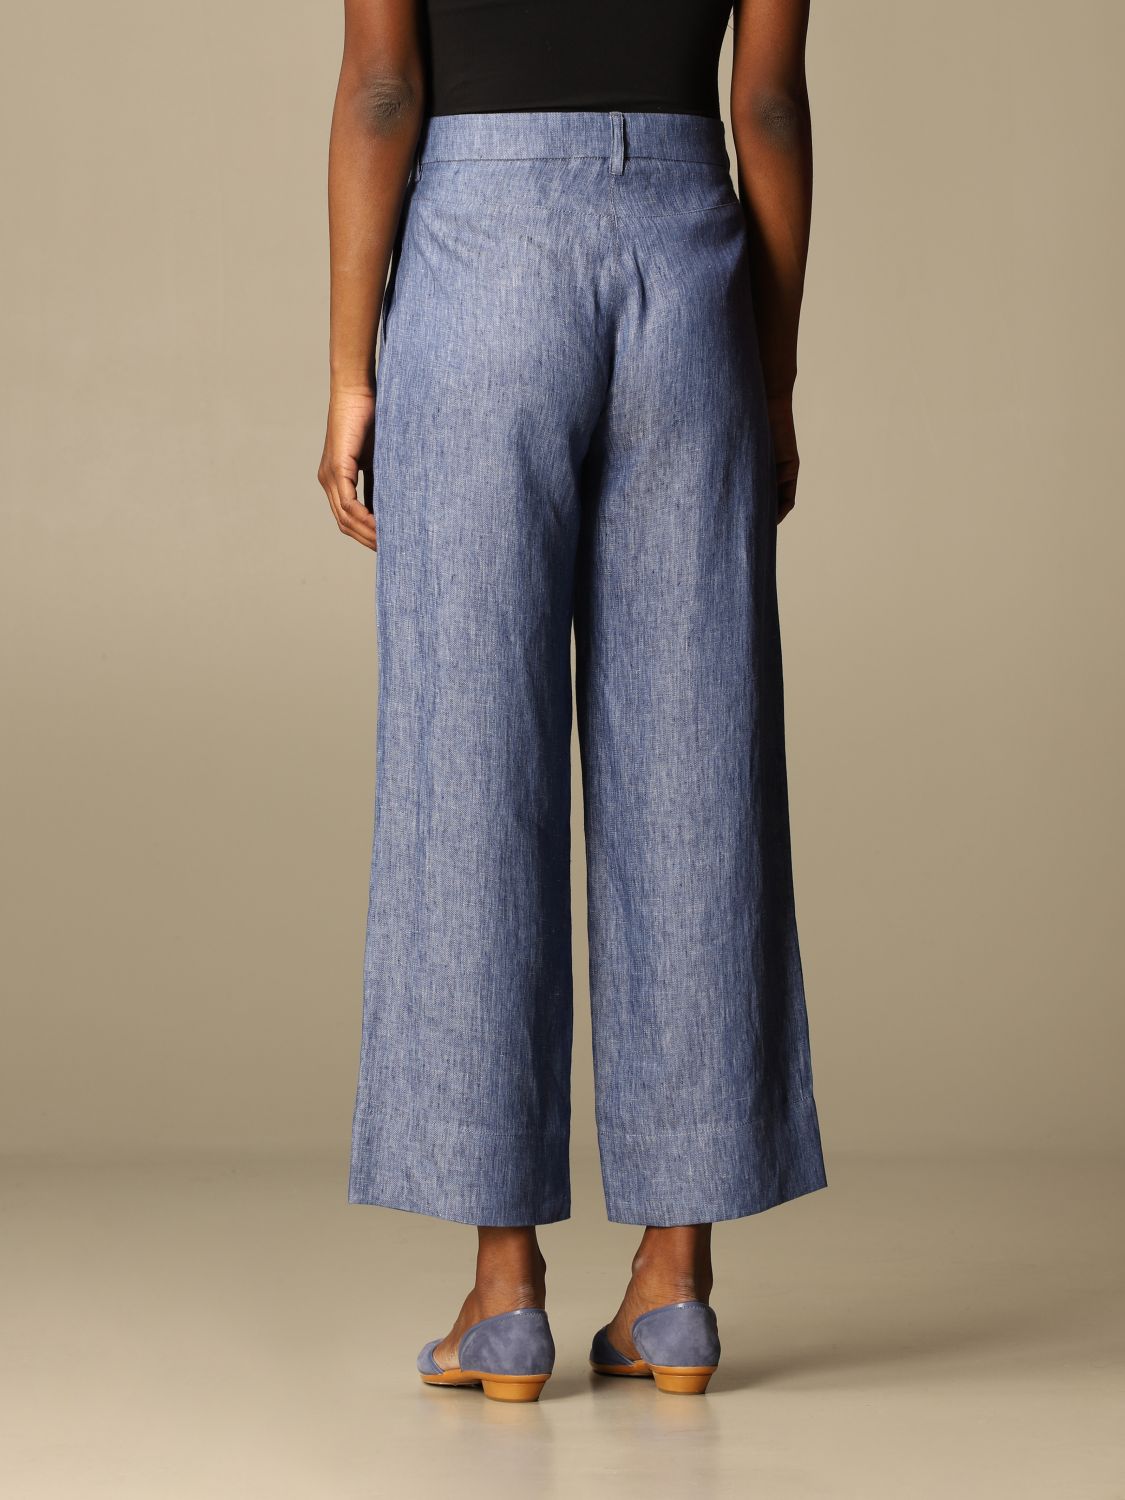 S MAX MARA: trousers in washed linen - Blue | S Max Mara pants ...